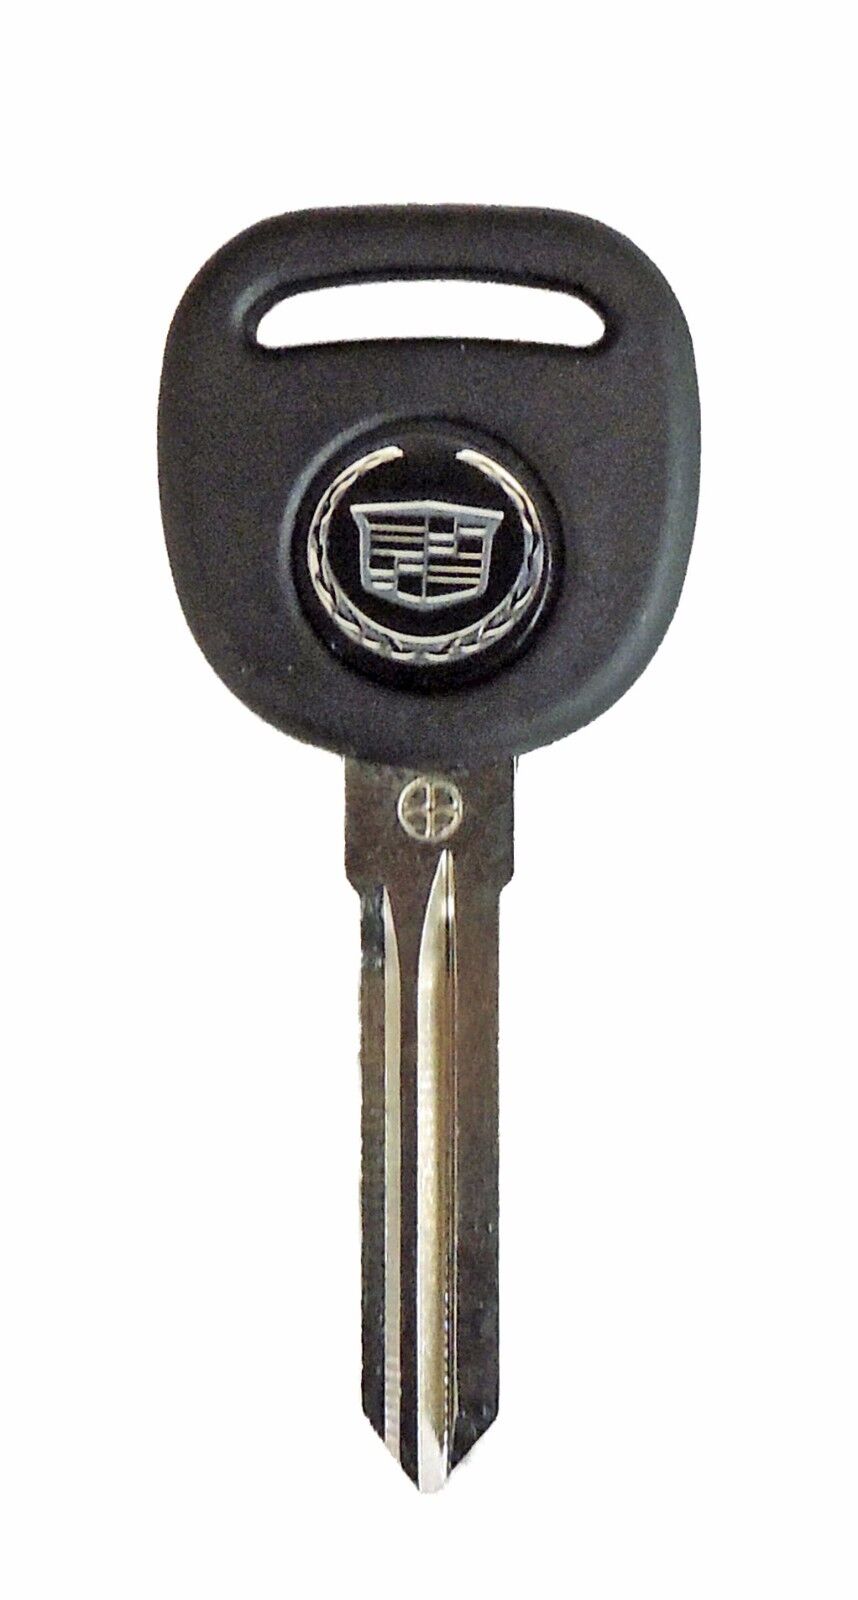 Circle Plus Transponder Chip Key with logo Cadillac Escalade, CTS, DTS, more